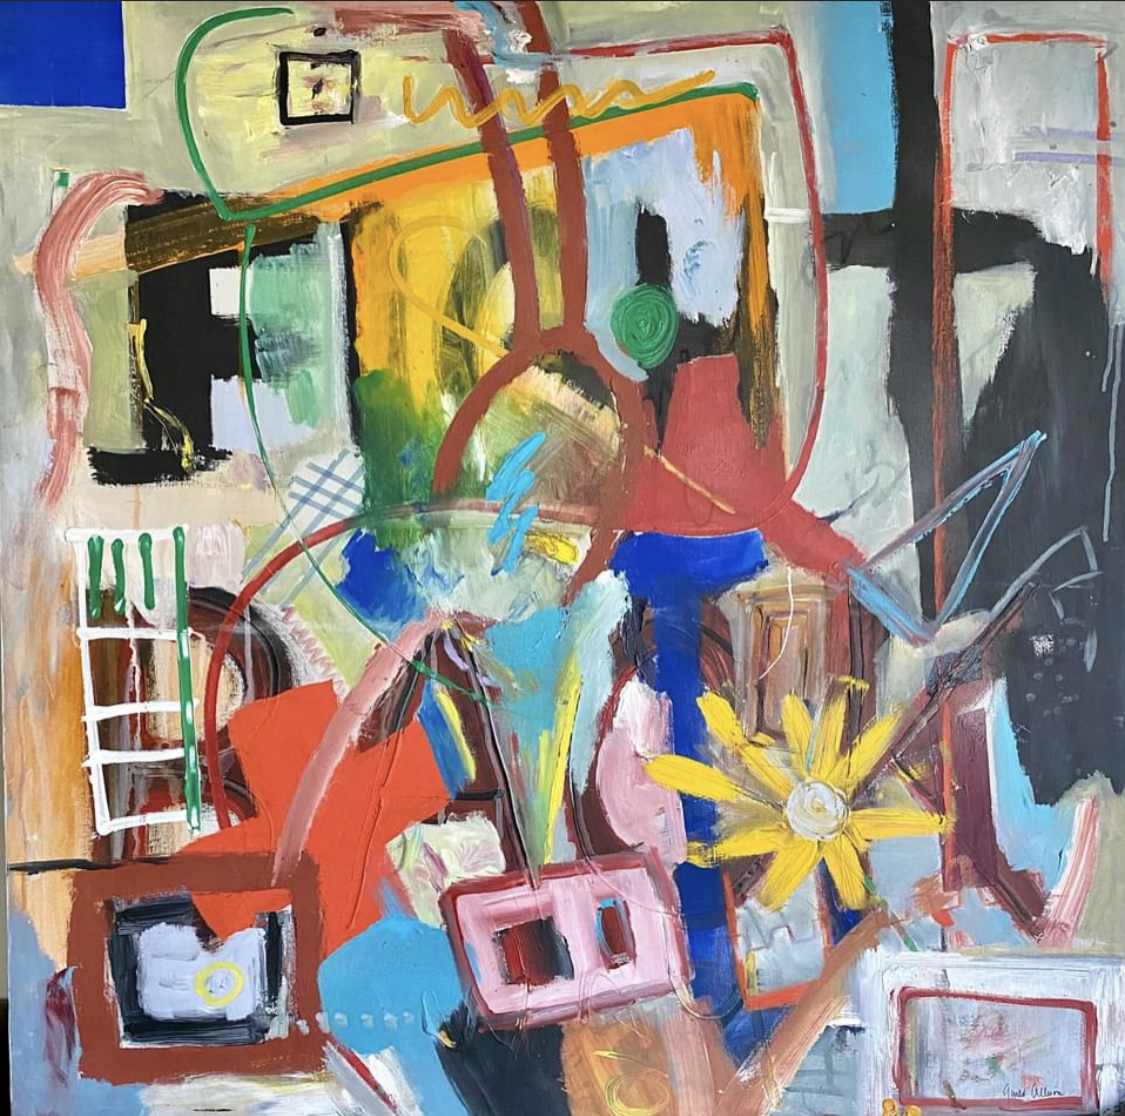 Abstract Painting by Gould Allison ( 1931 - 2015 ) titled Fight Back.